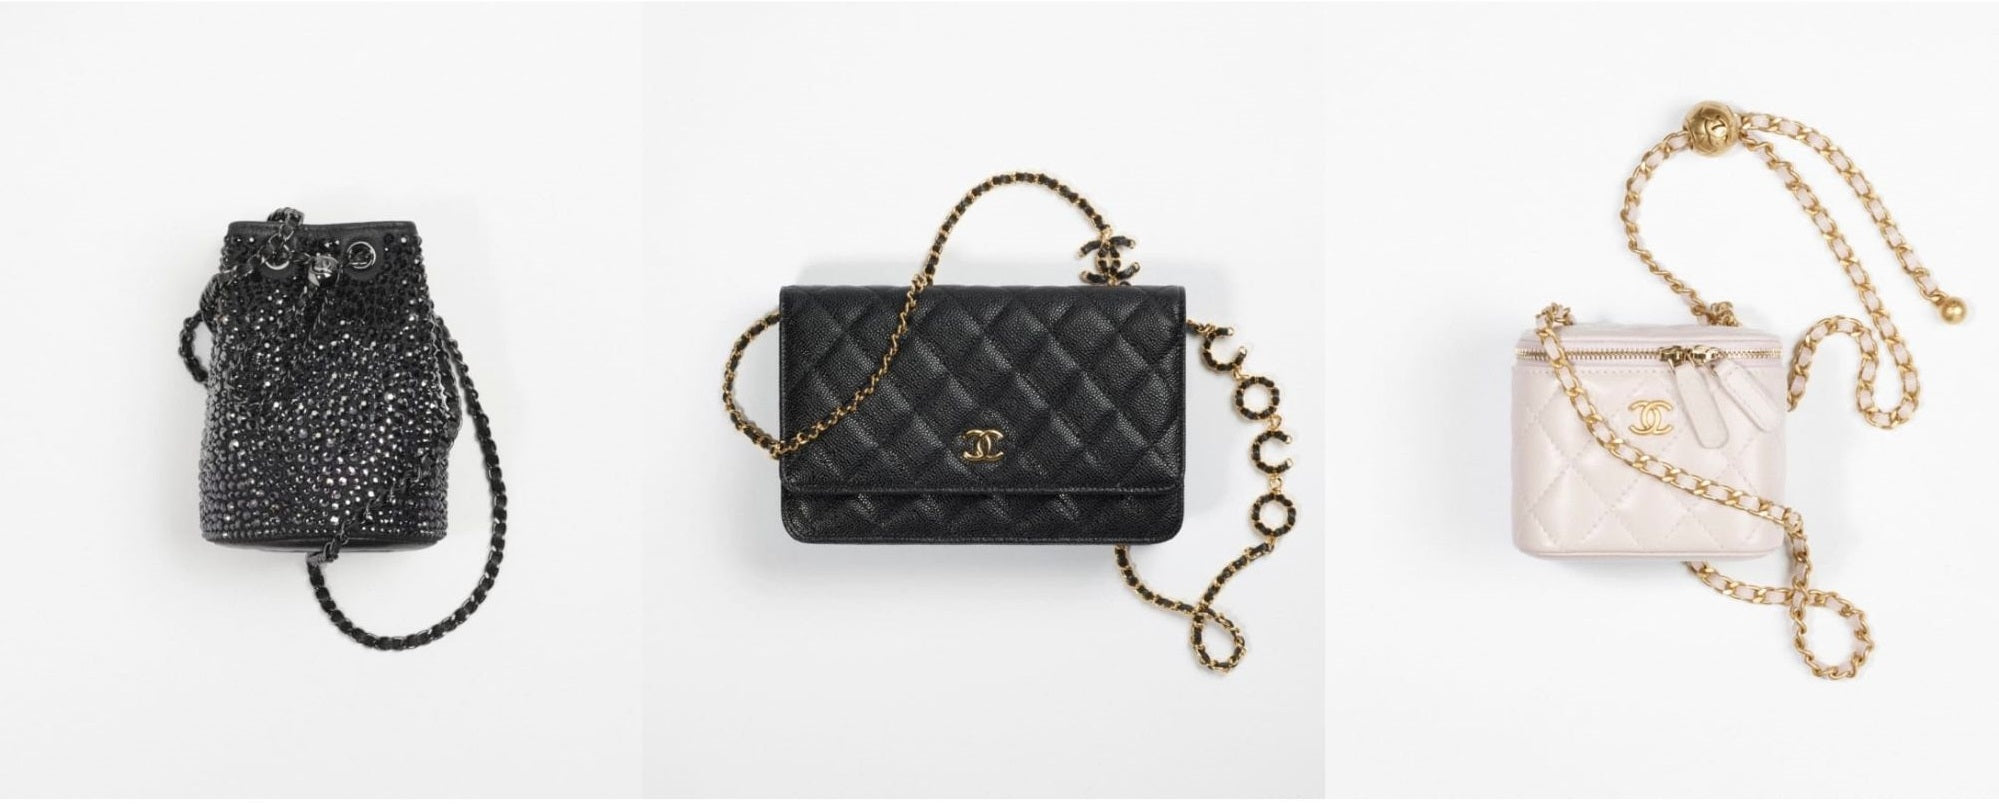 Chanel Fall/Winter 2021 Bag Collection: Styles and Prices small leather goods